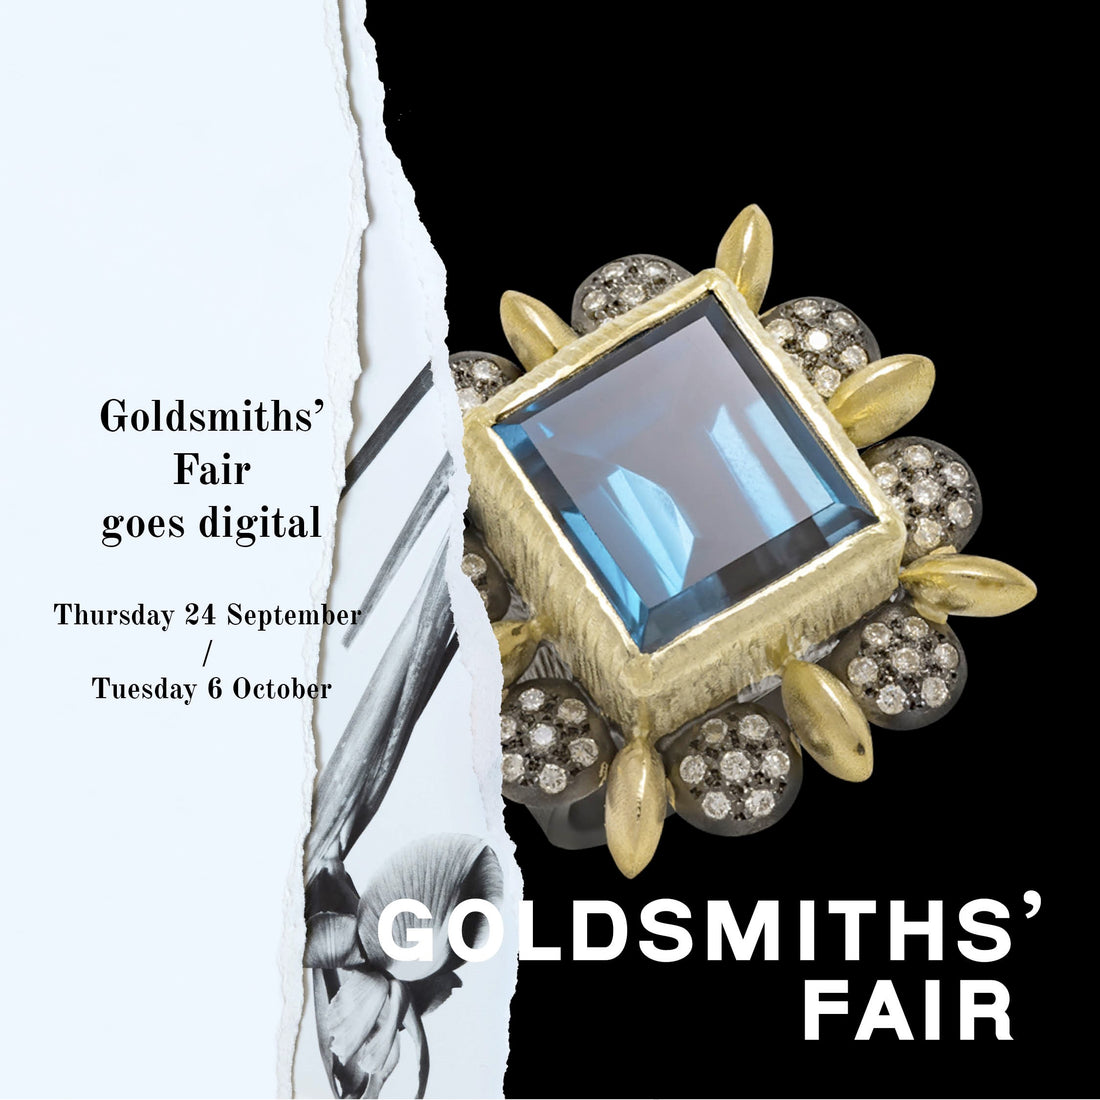 Goldsmiths' Fair goes digital | Find us there